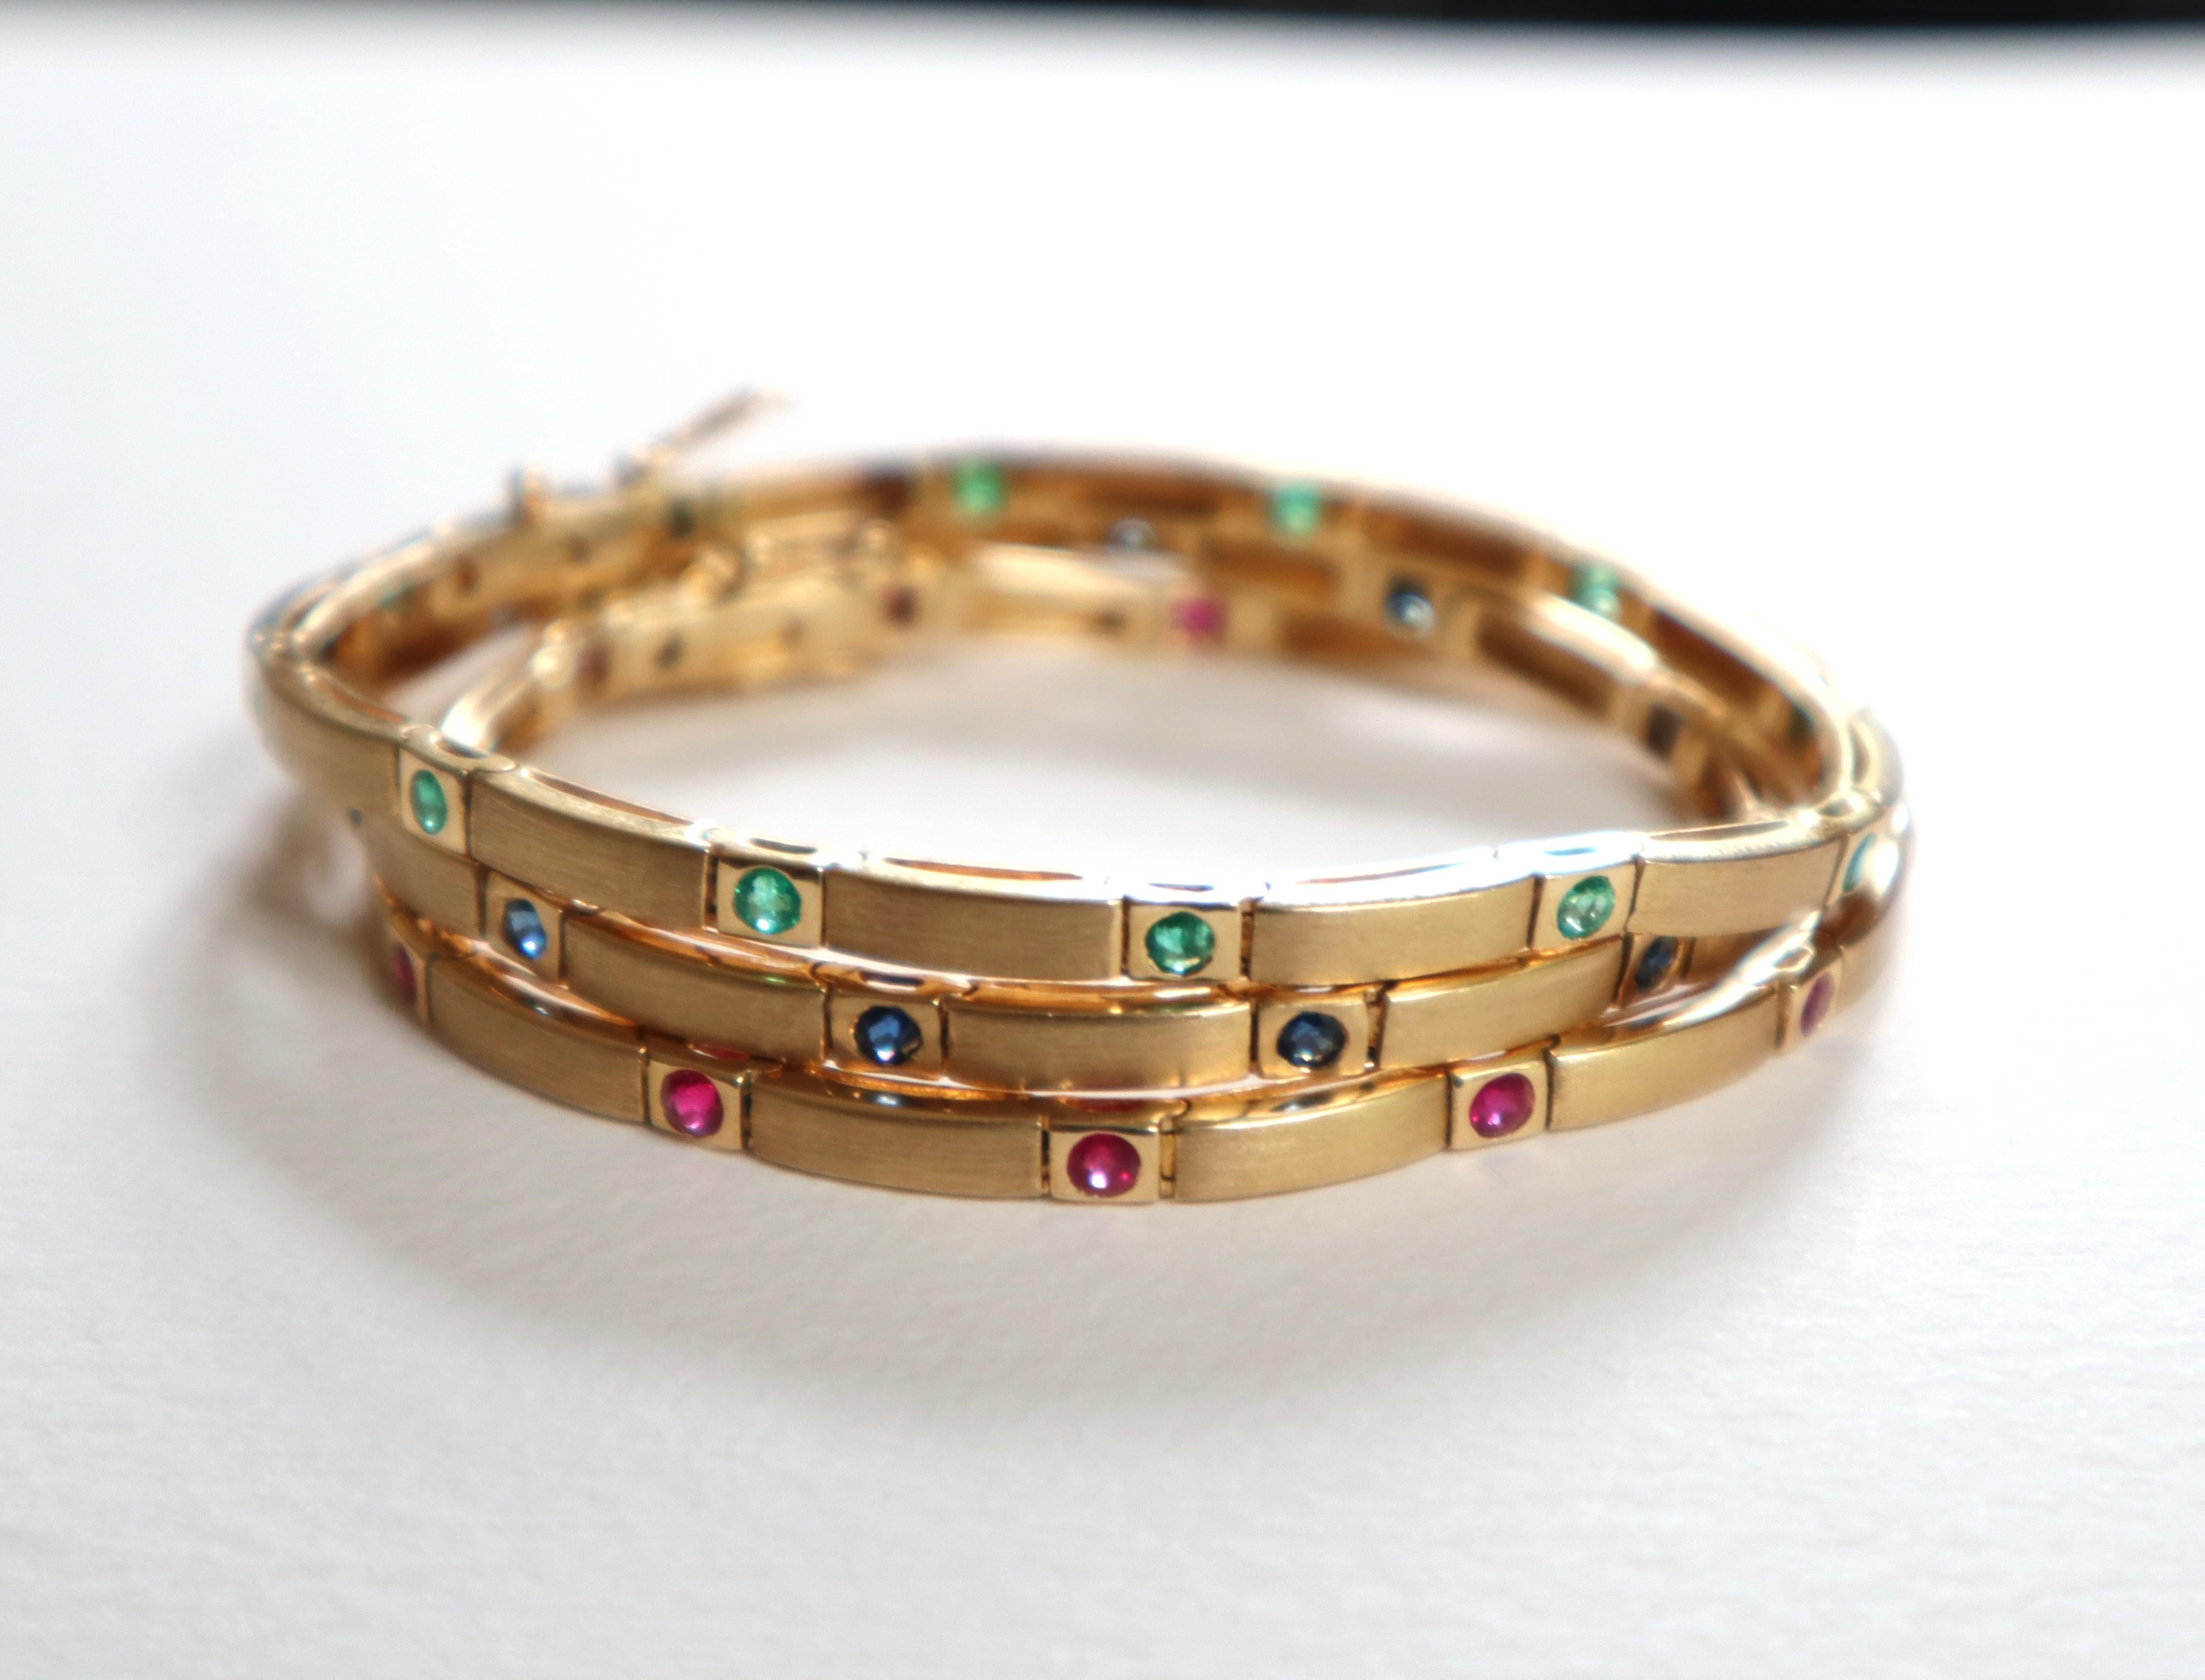 Set of 3 Bracelets in 18 Kt Yellow Satin Gold, Rubies, Emeralds, Sapphires For Sale 1